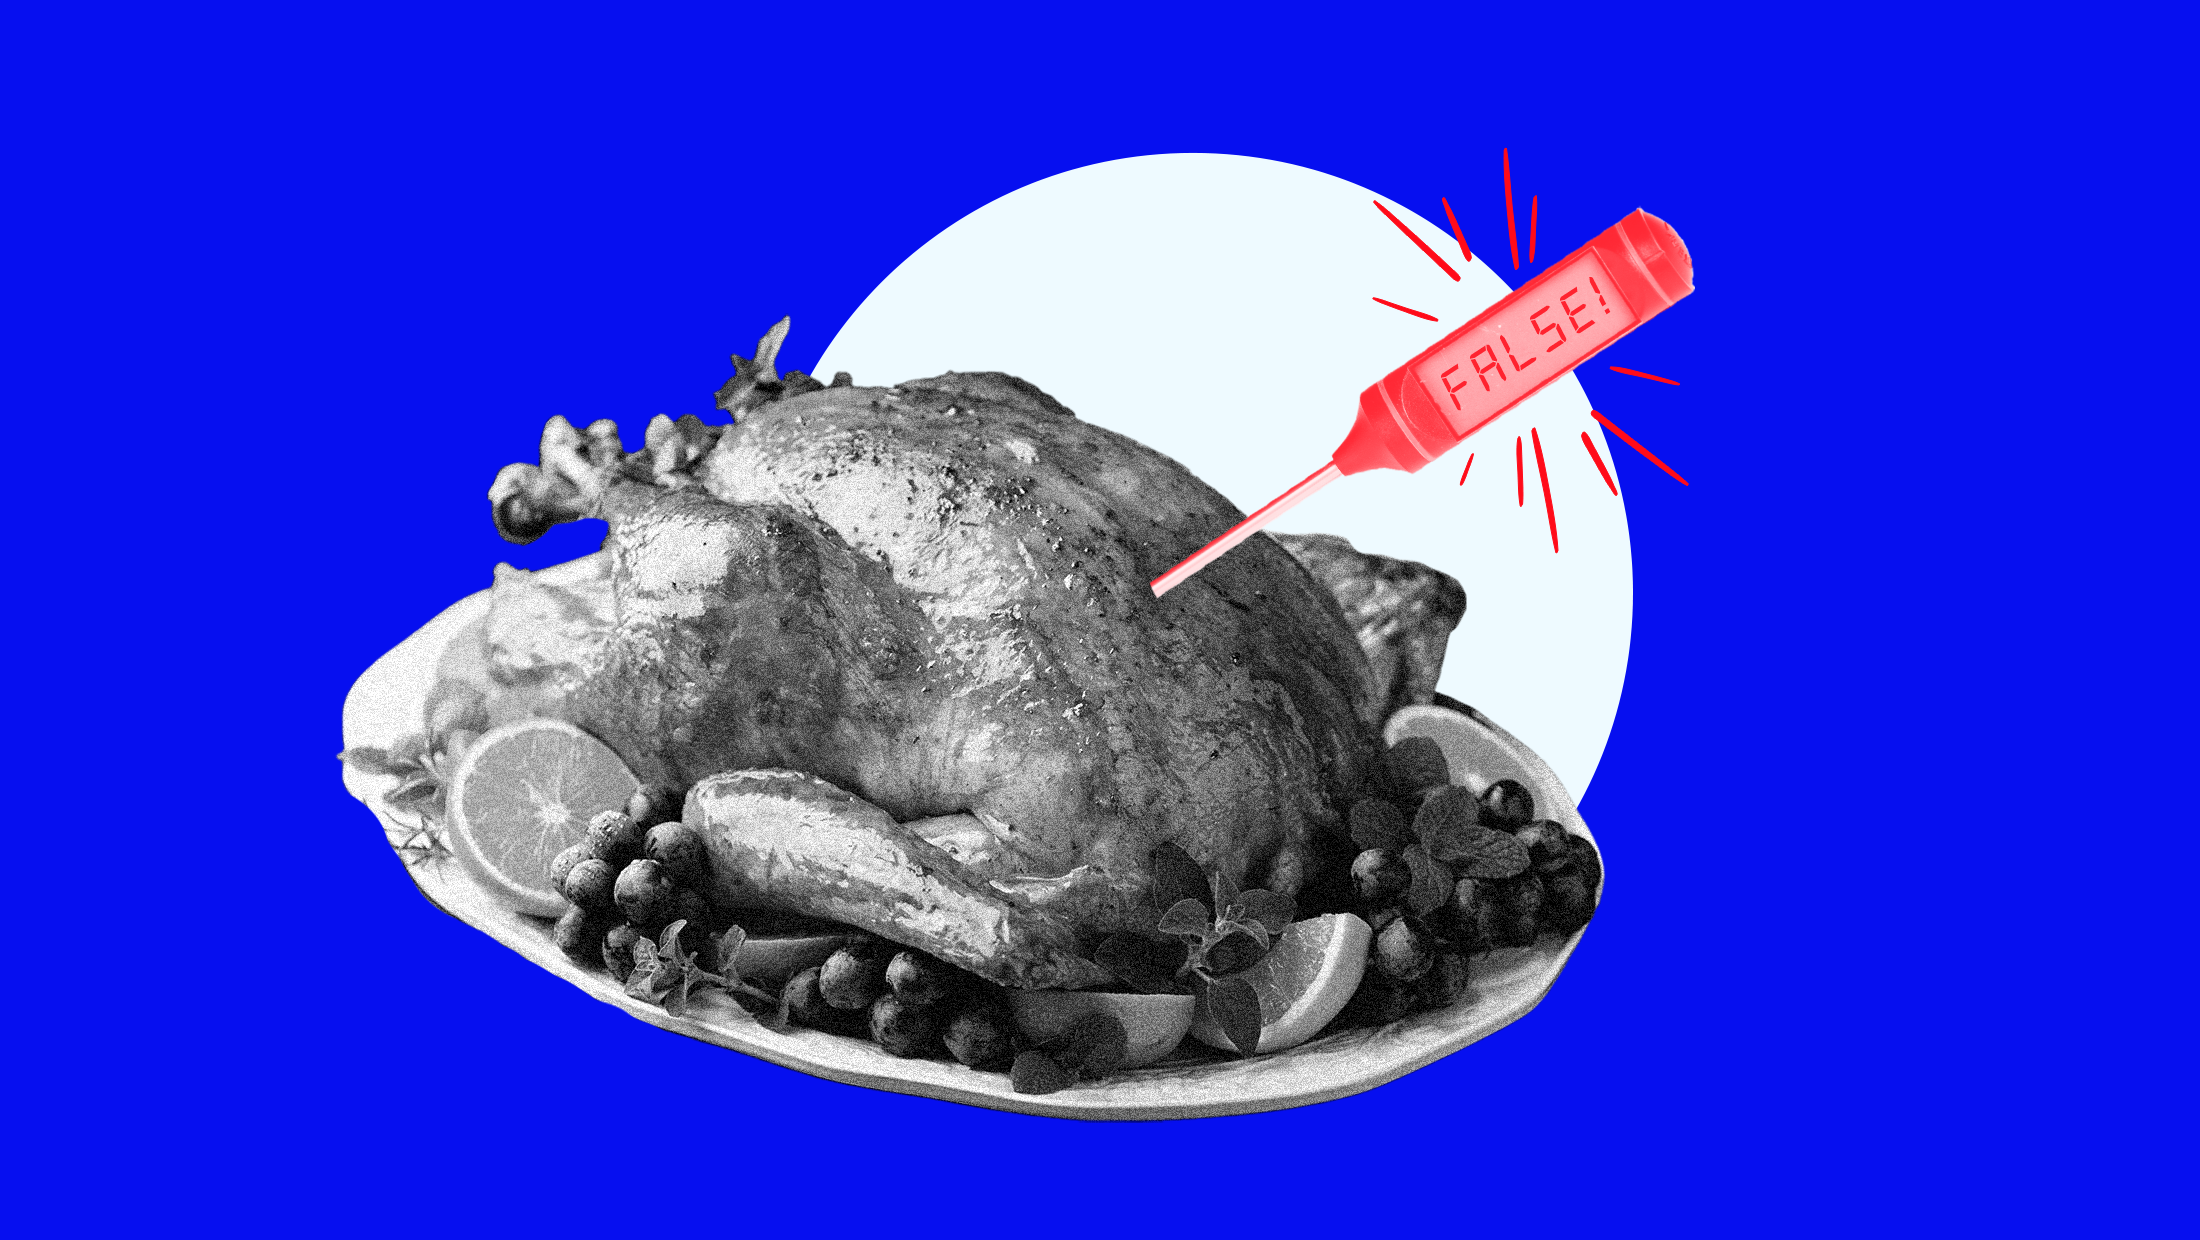 A meat thermometer that reads "FALSE" inserted into a traditional Thanksgiving turkey